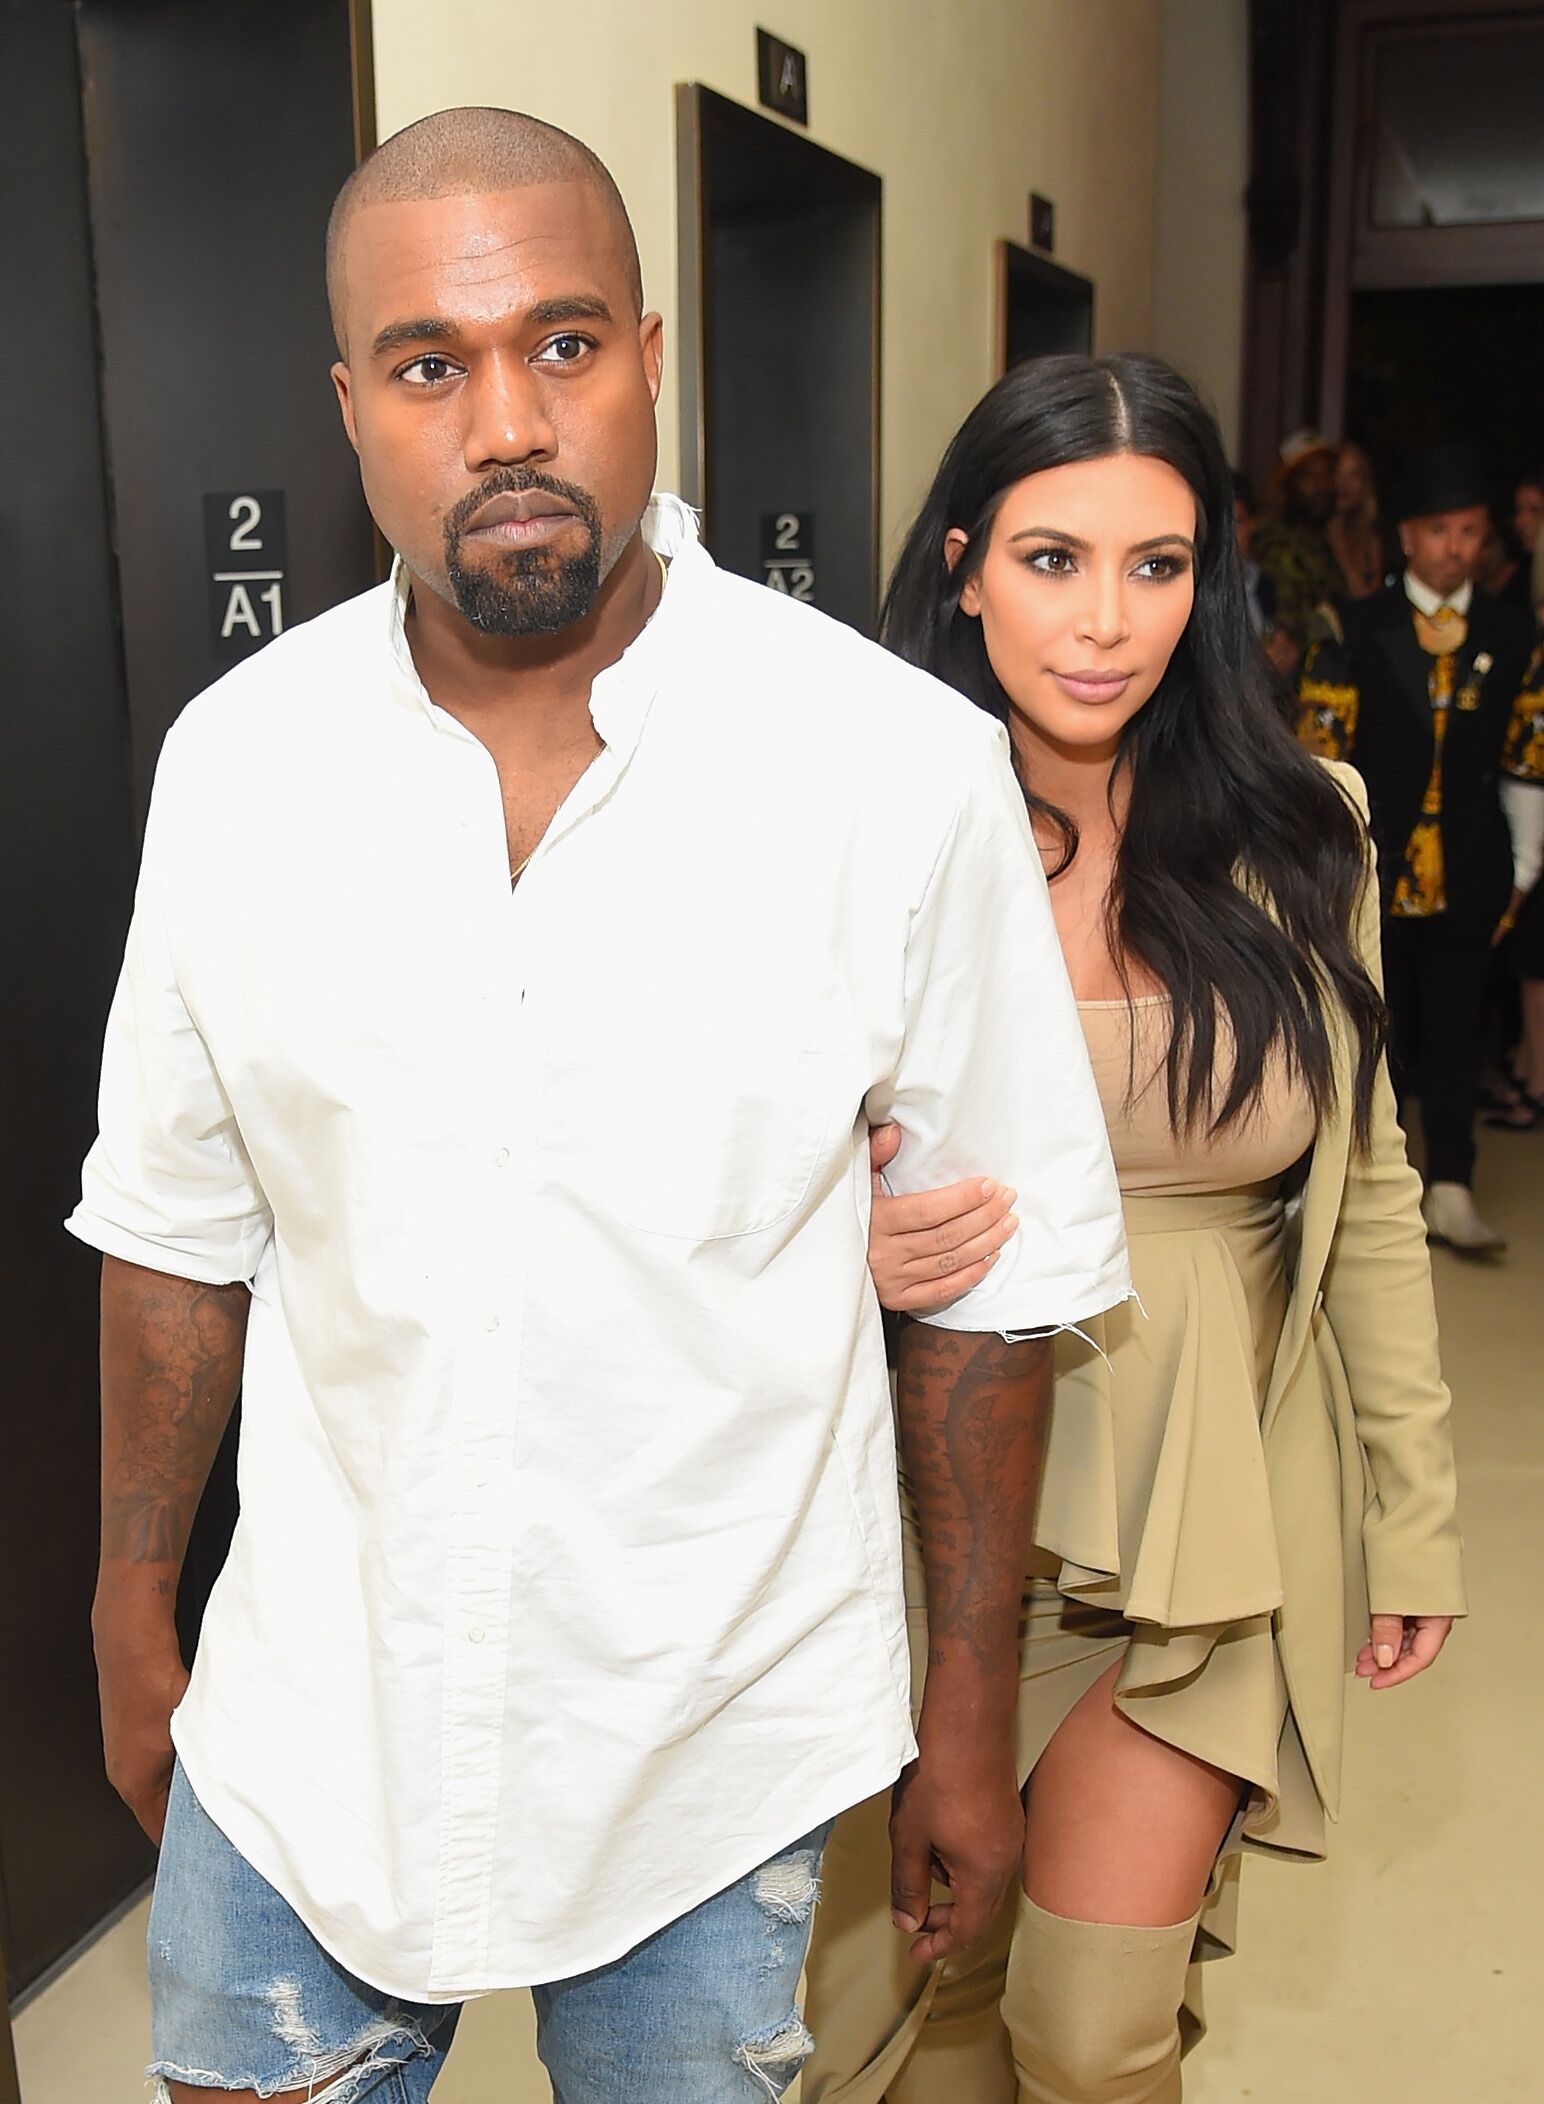 Kanye West and Kim Kardashian-West at the Rihanna Party on September 10, 2015, in New York City | Photo: Michael Loccisano/Getty Images